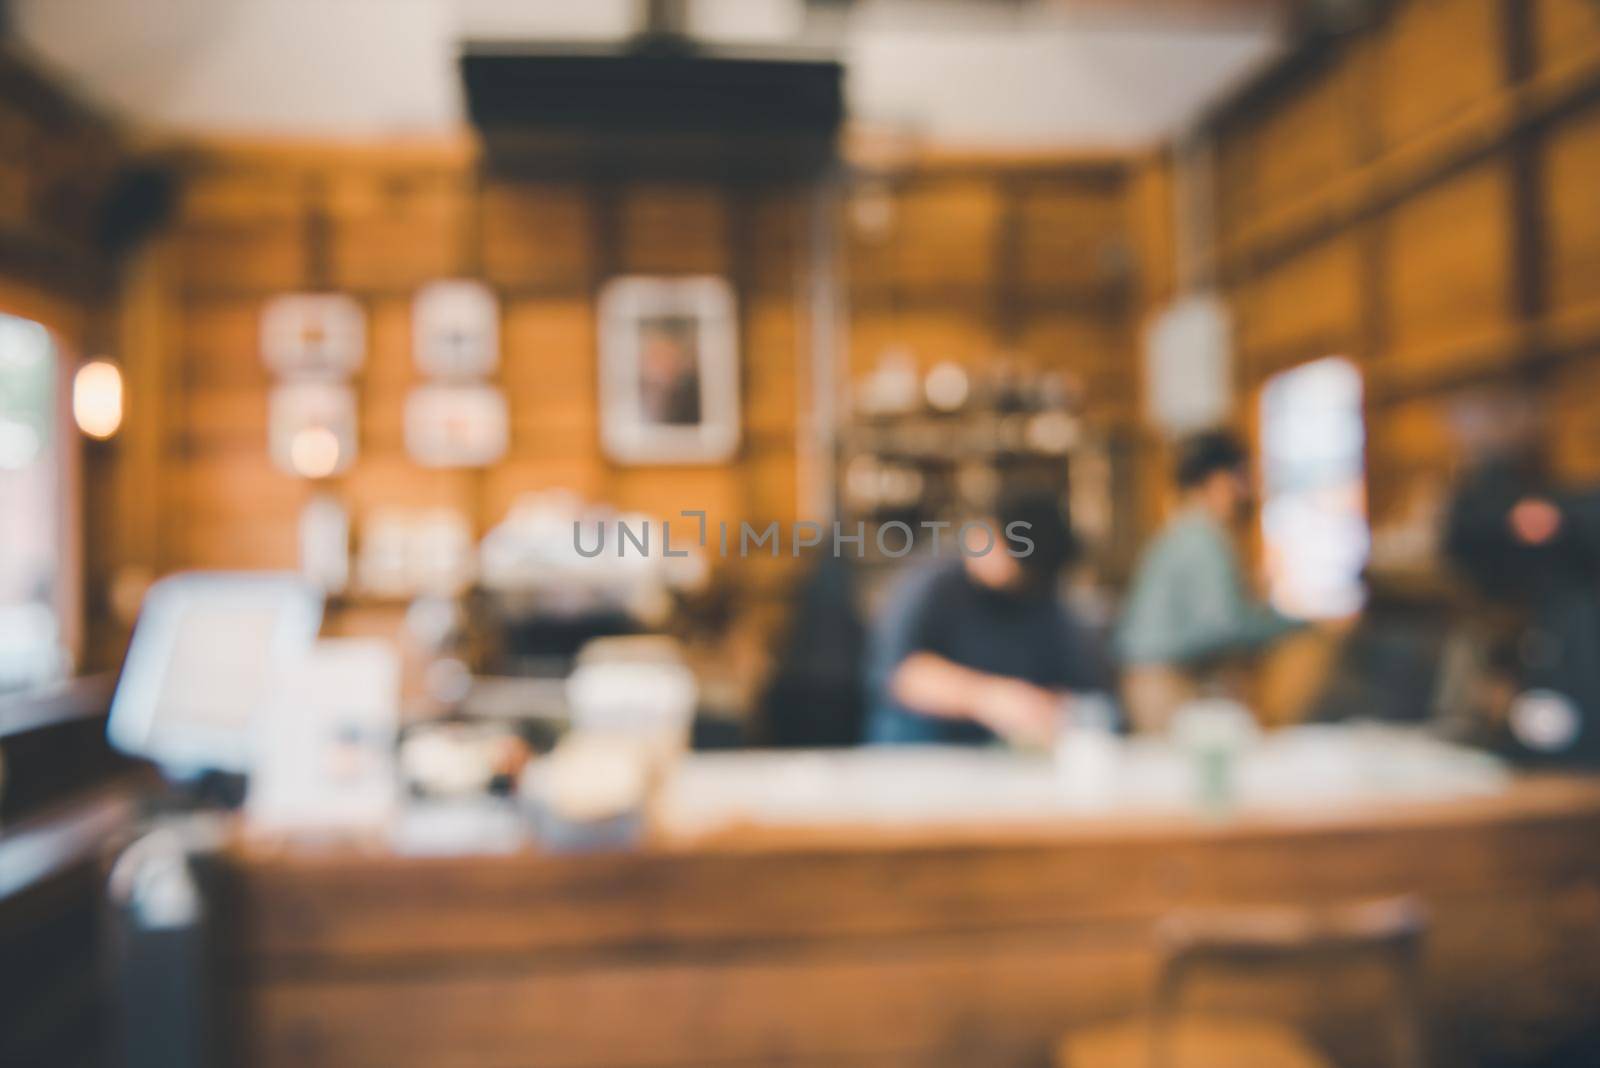 Coffee Cafe Shop Background, Abstract Defocused Blur of Interior Coffee Shop and Restaurant. Coffee Interiors Bar Space for Customer Relax. Blurry Bokeh Light Bulb in Cafe Store by MahaHeang245789